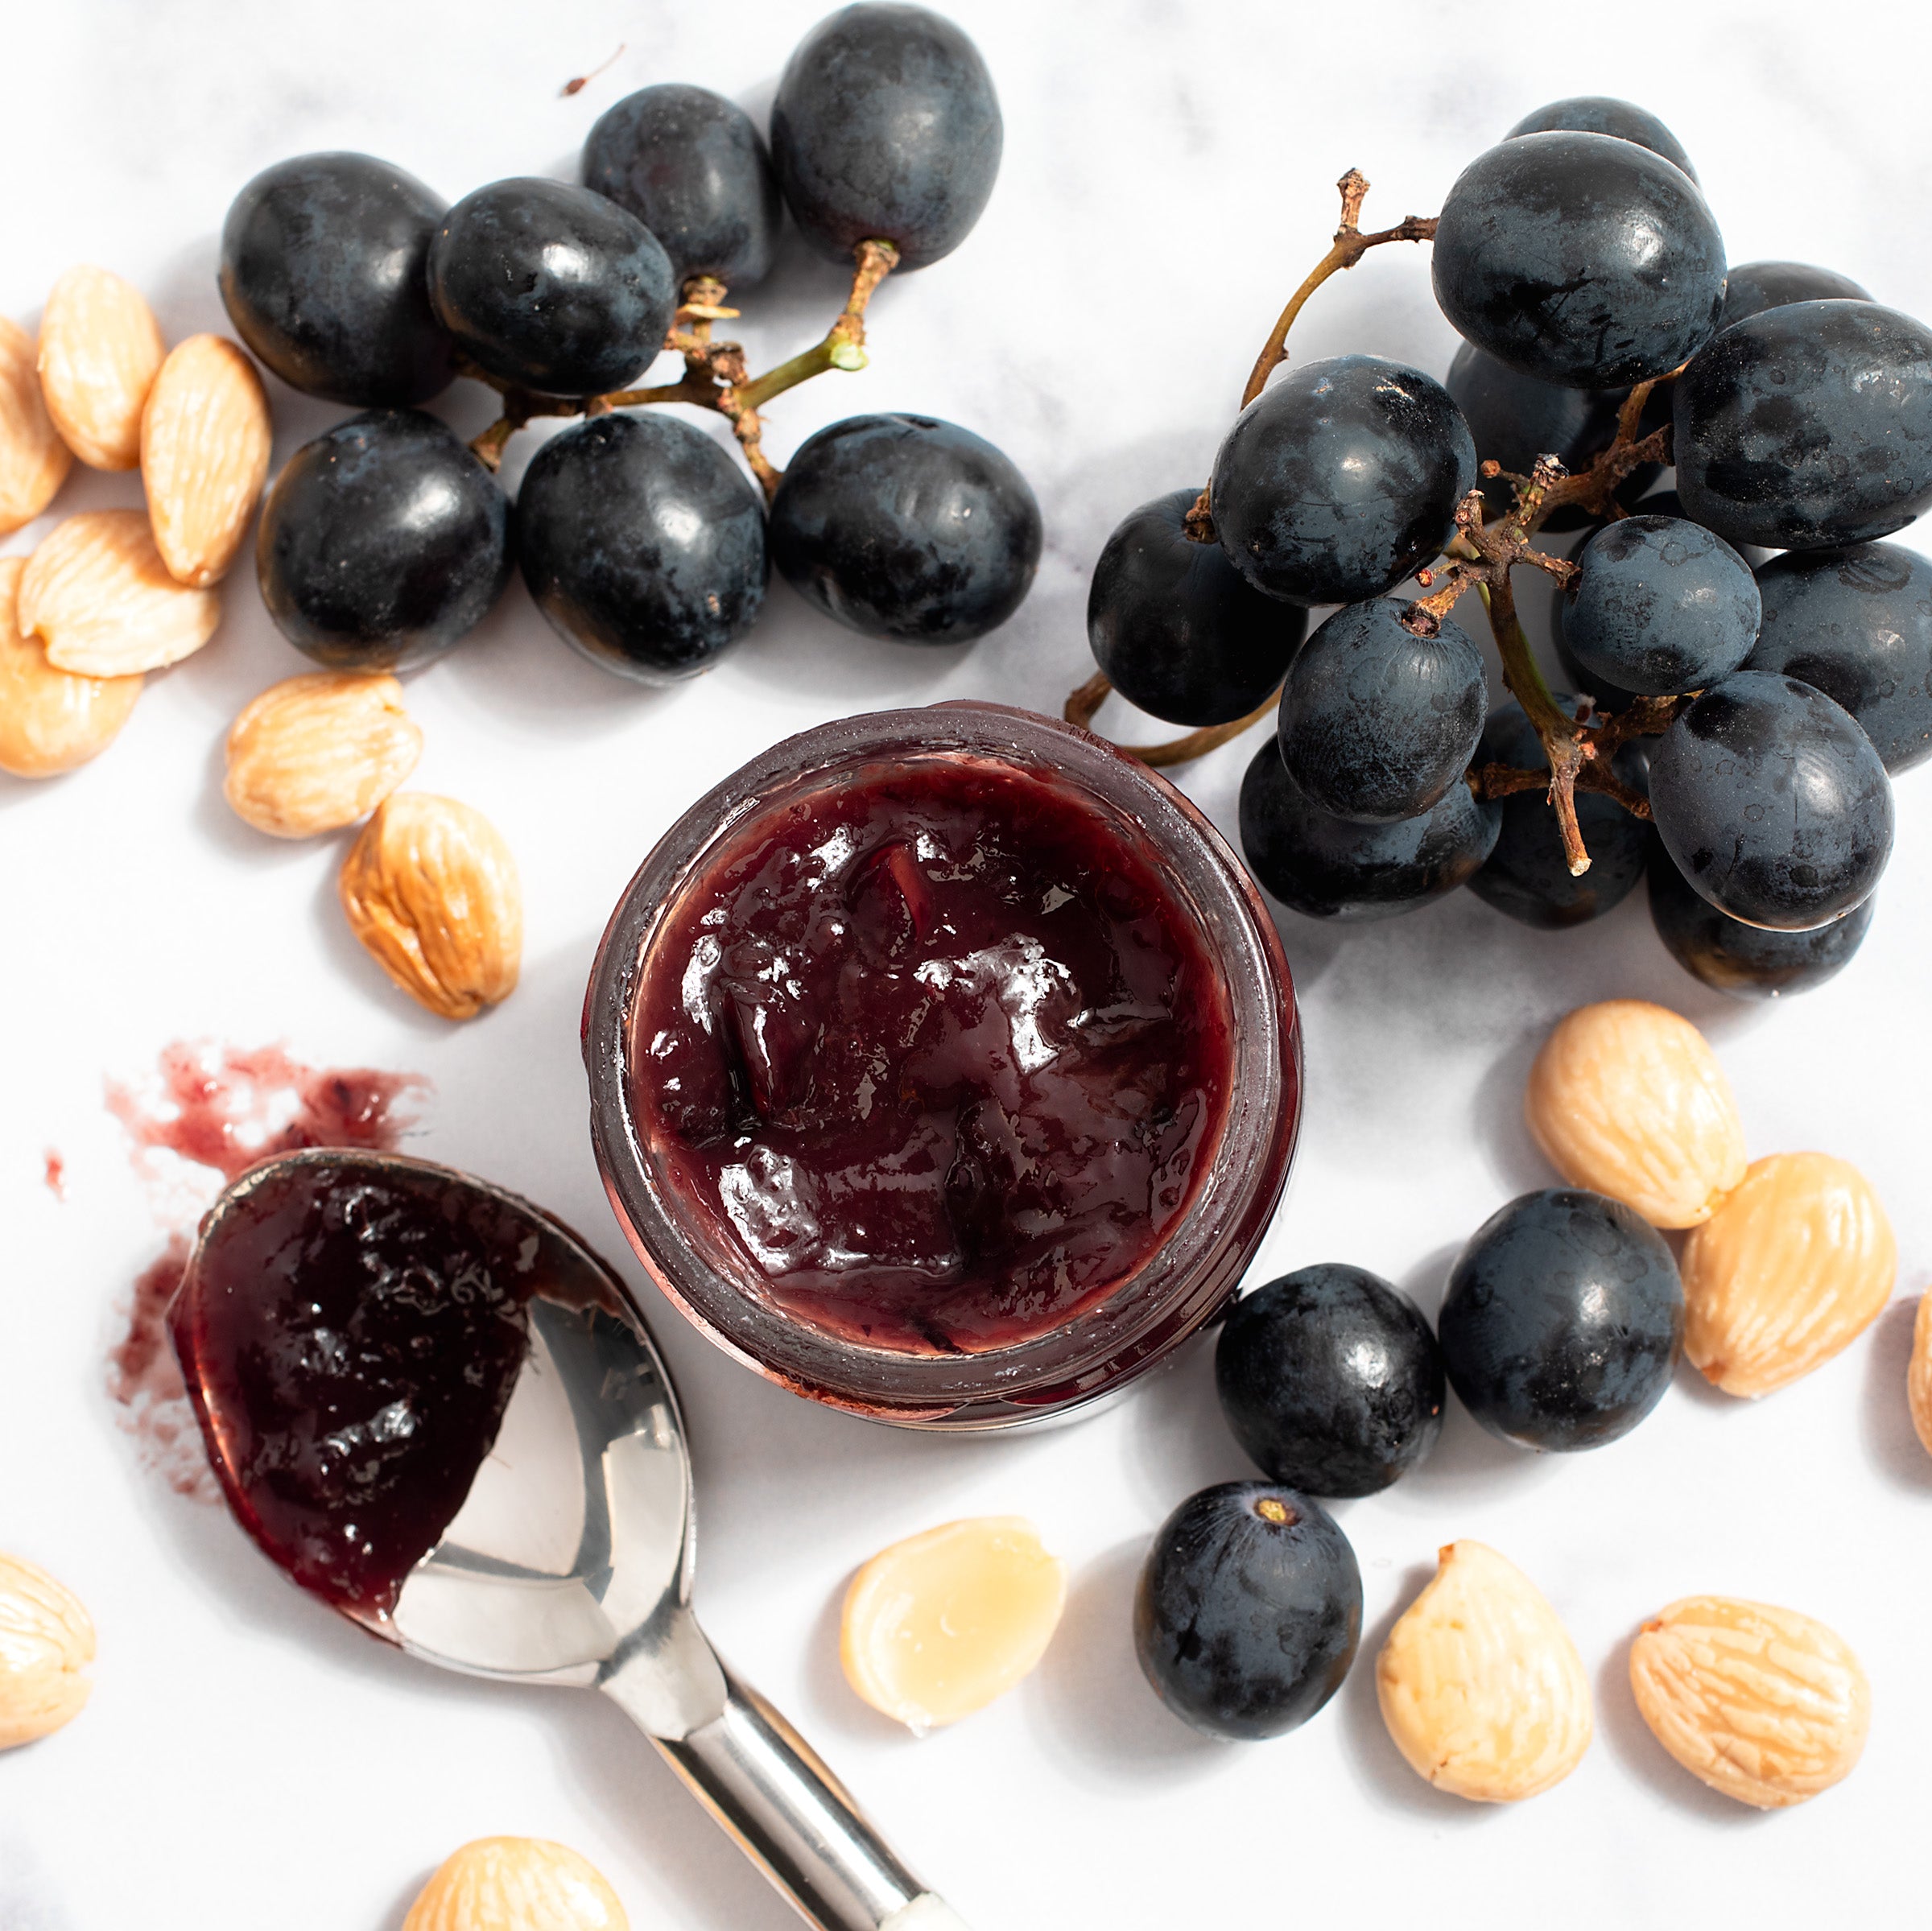 igourmet_15165-6_Spanish Black Grapes & Almond Spread for Washed Rind Cheeses_Can Bech_Jam, Preserves & Nut Butter